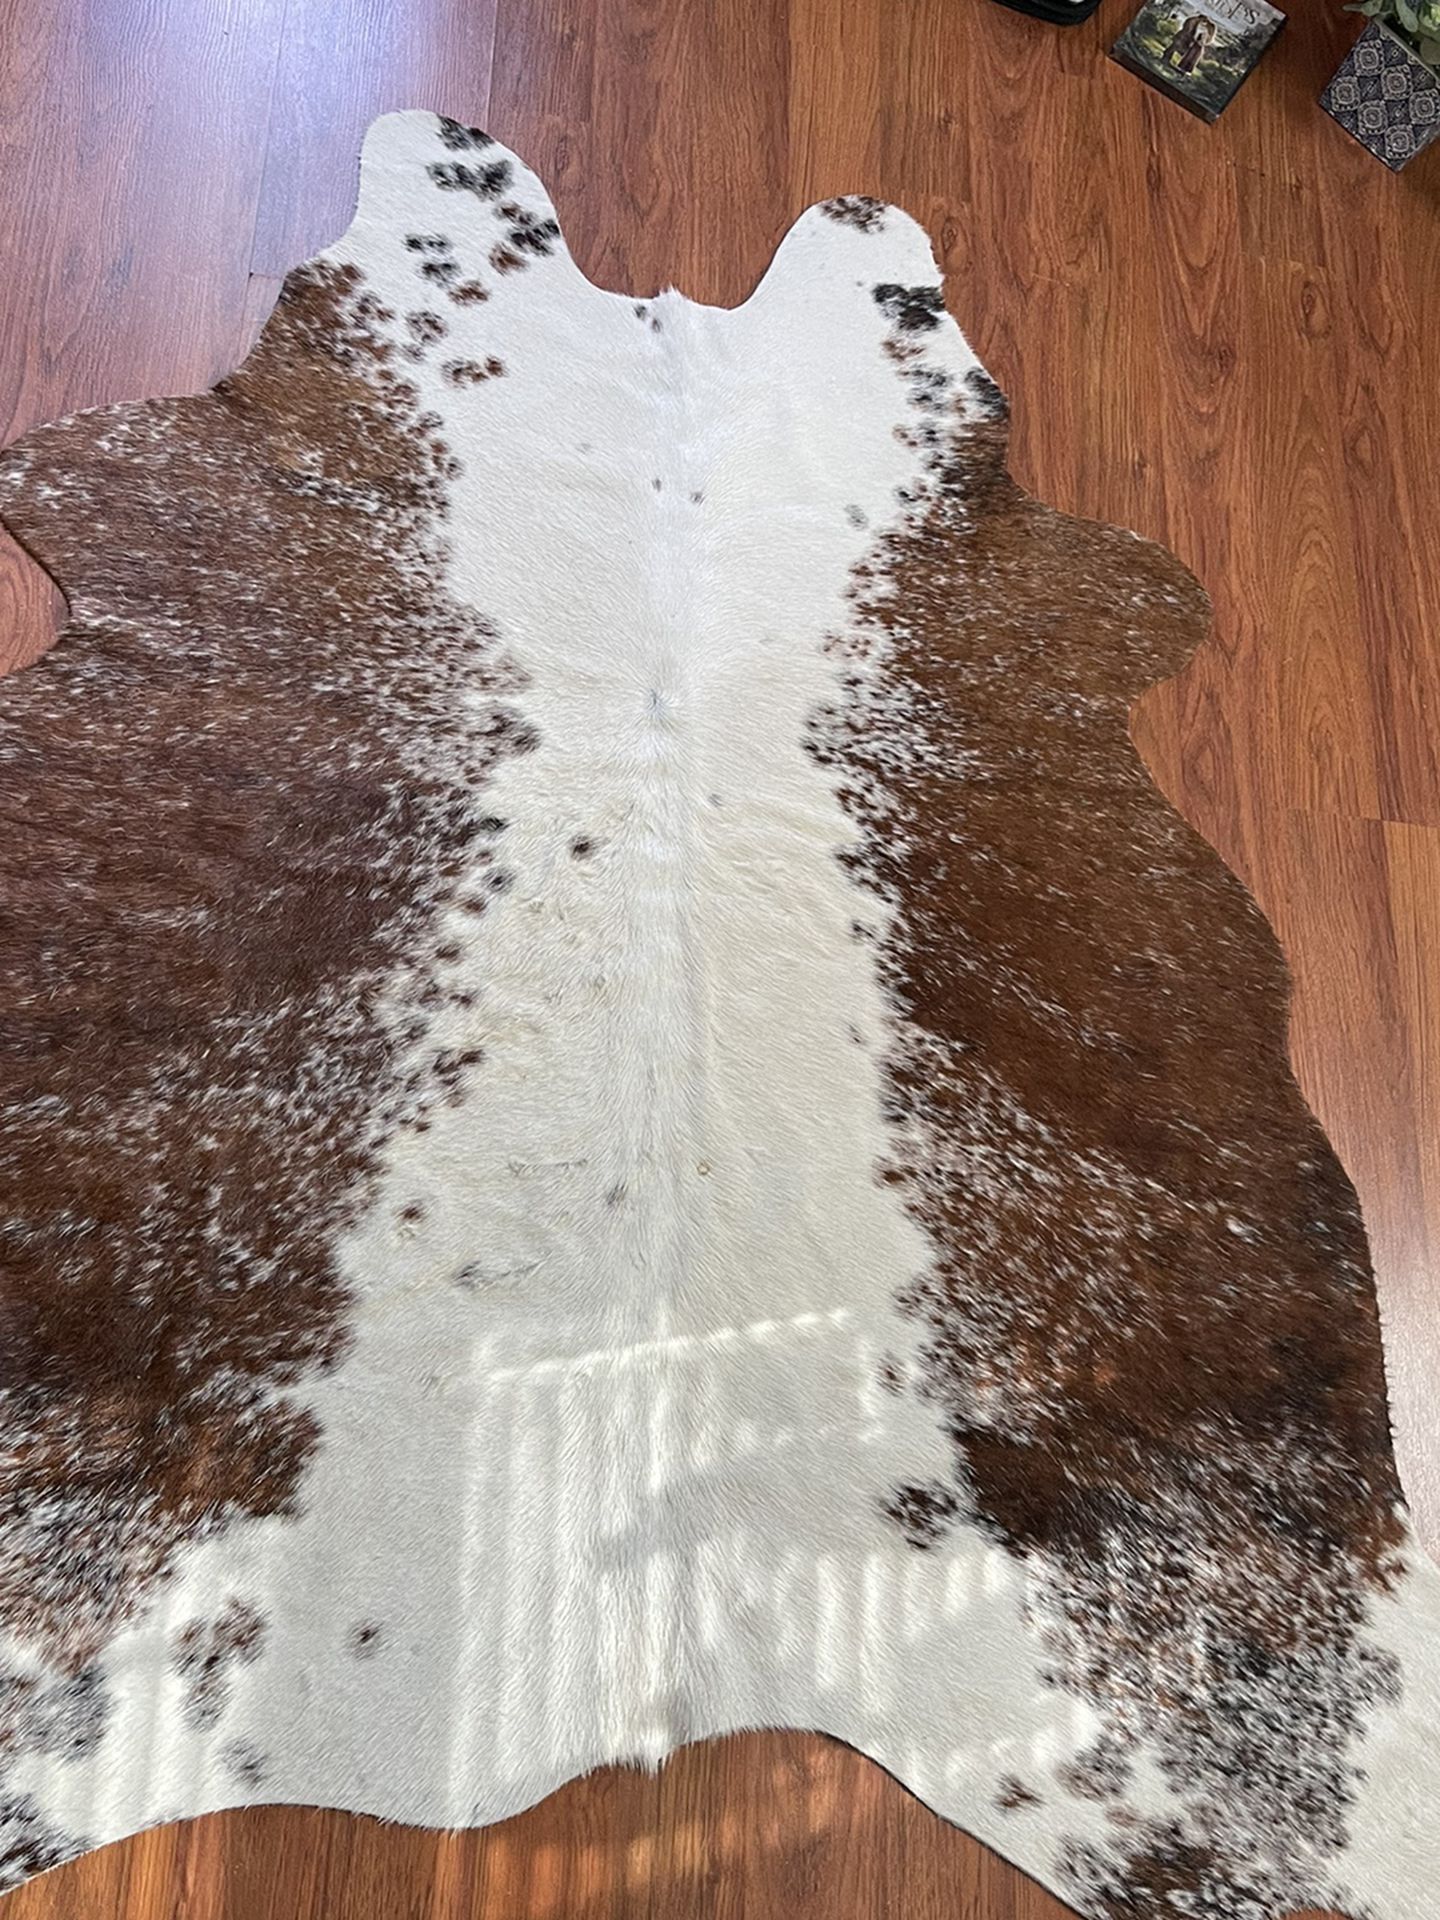 Authentic Cow Skin Rug (Handmade In TX)